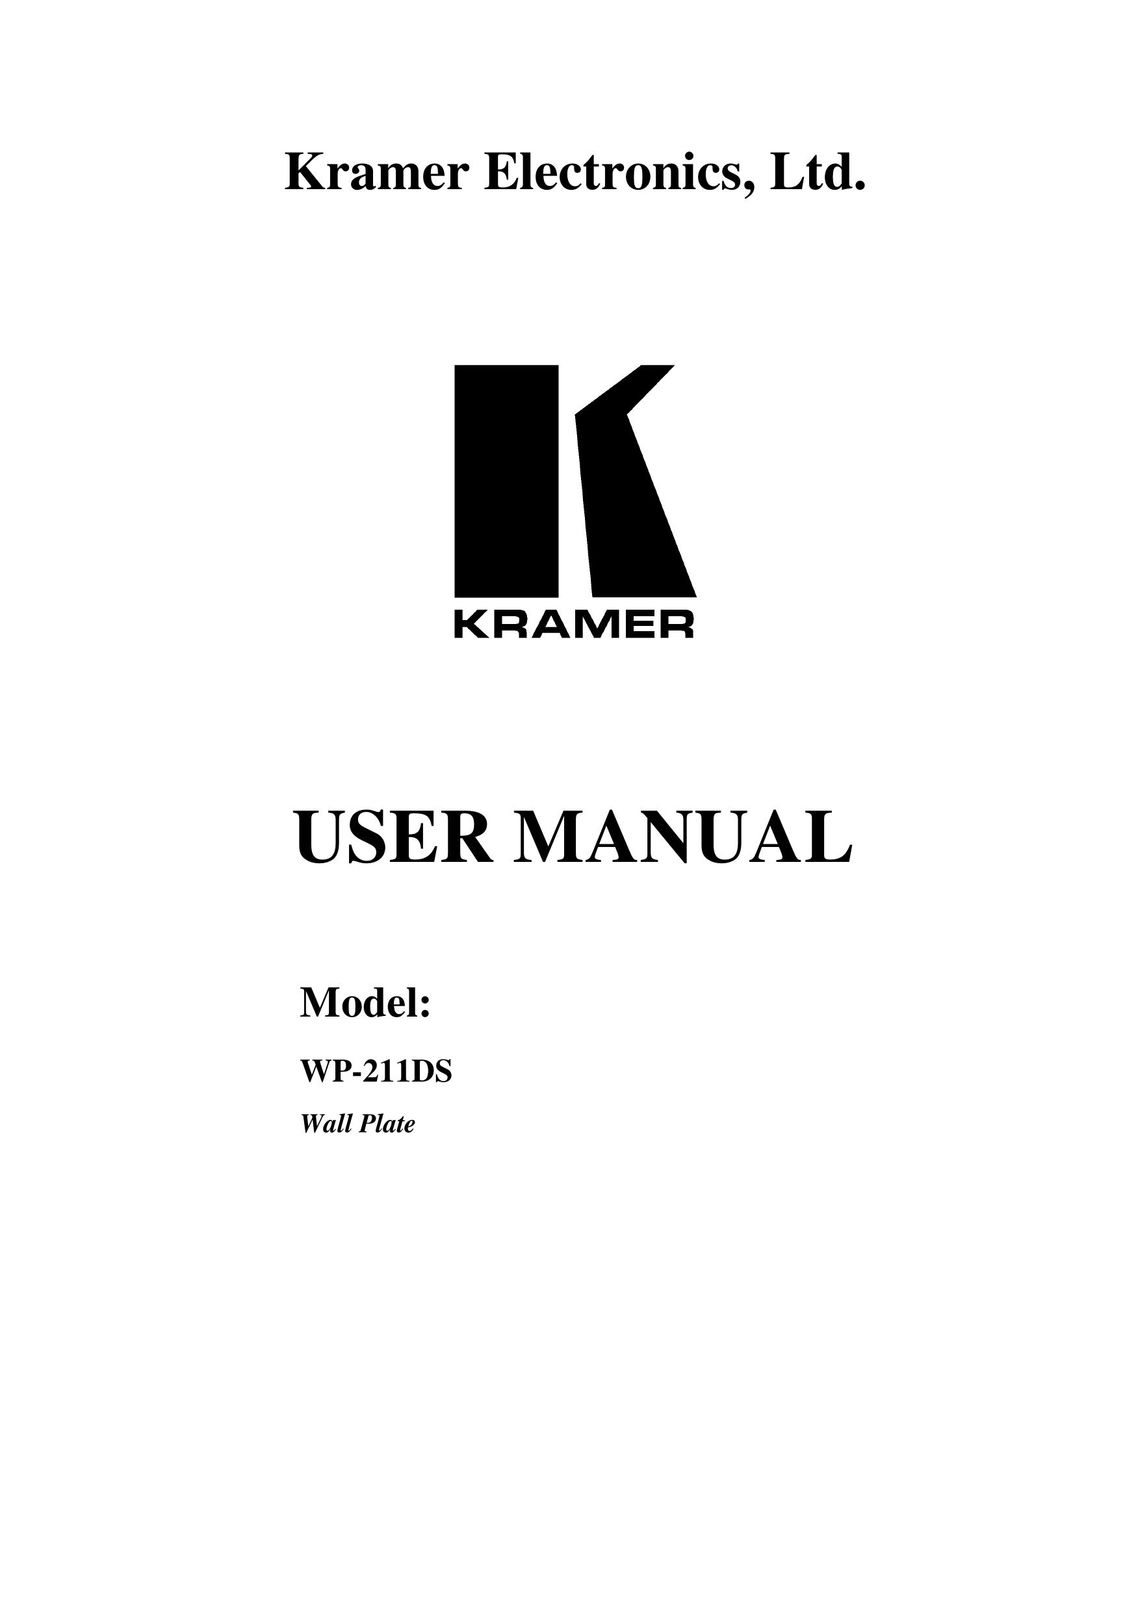 Kramer Electronics WP-211DS Air Conditioner User Manual